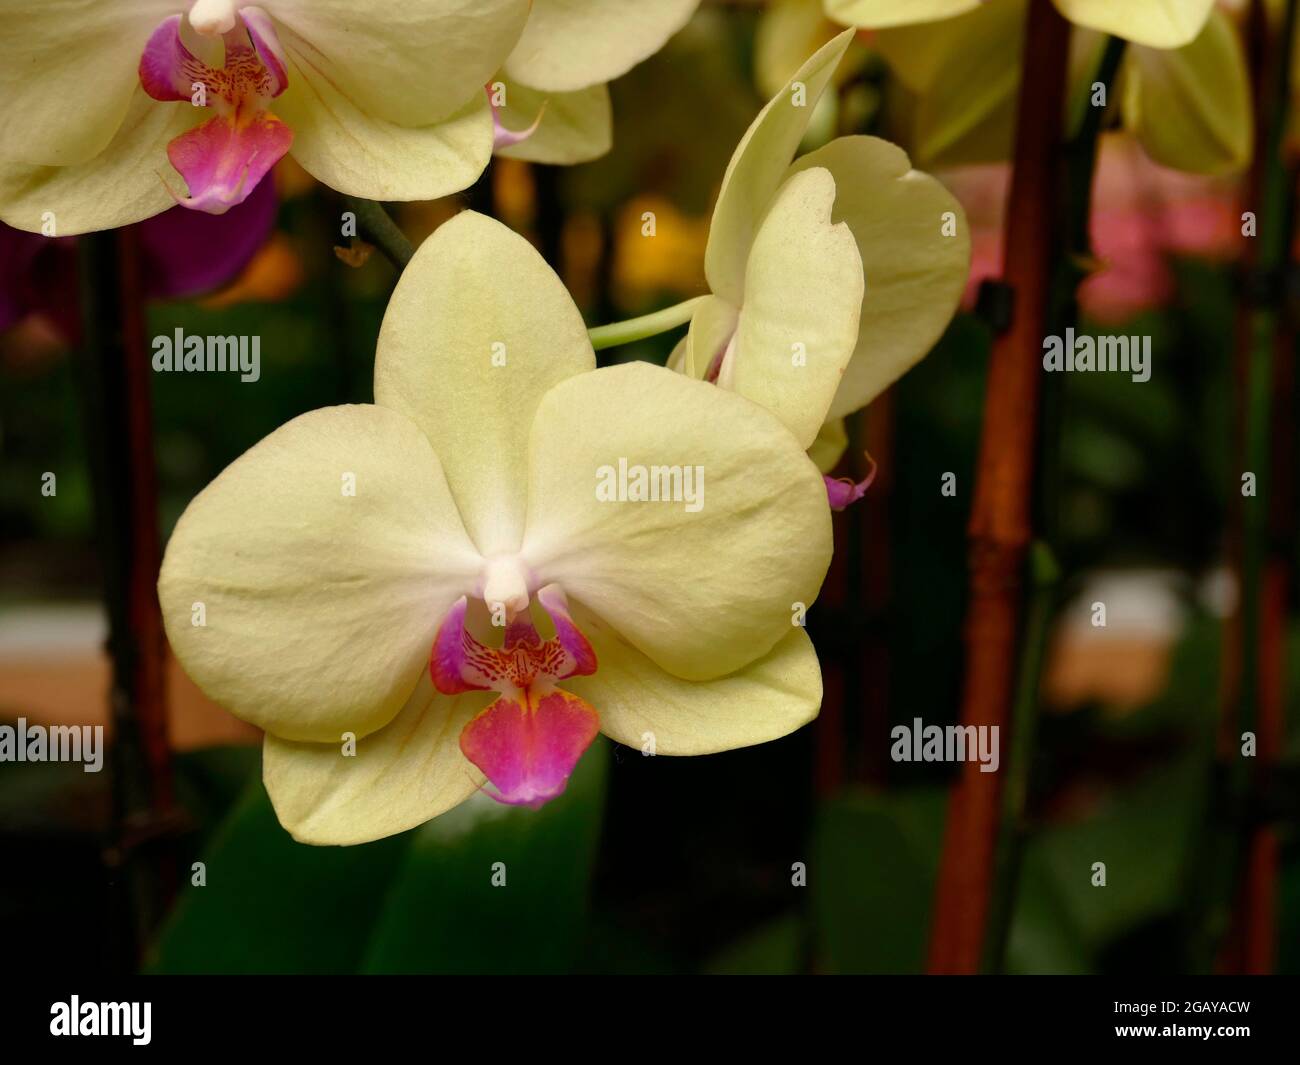 Pixels Phalaenopsis Orchid Yellow Petals with a Pink Center Indoor potted House Plant Stock Photo